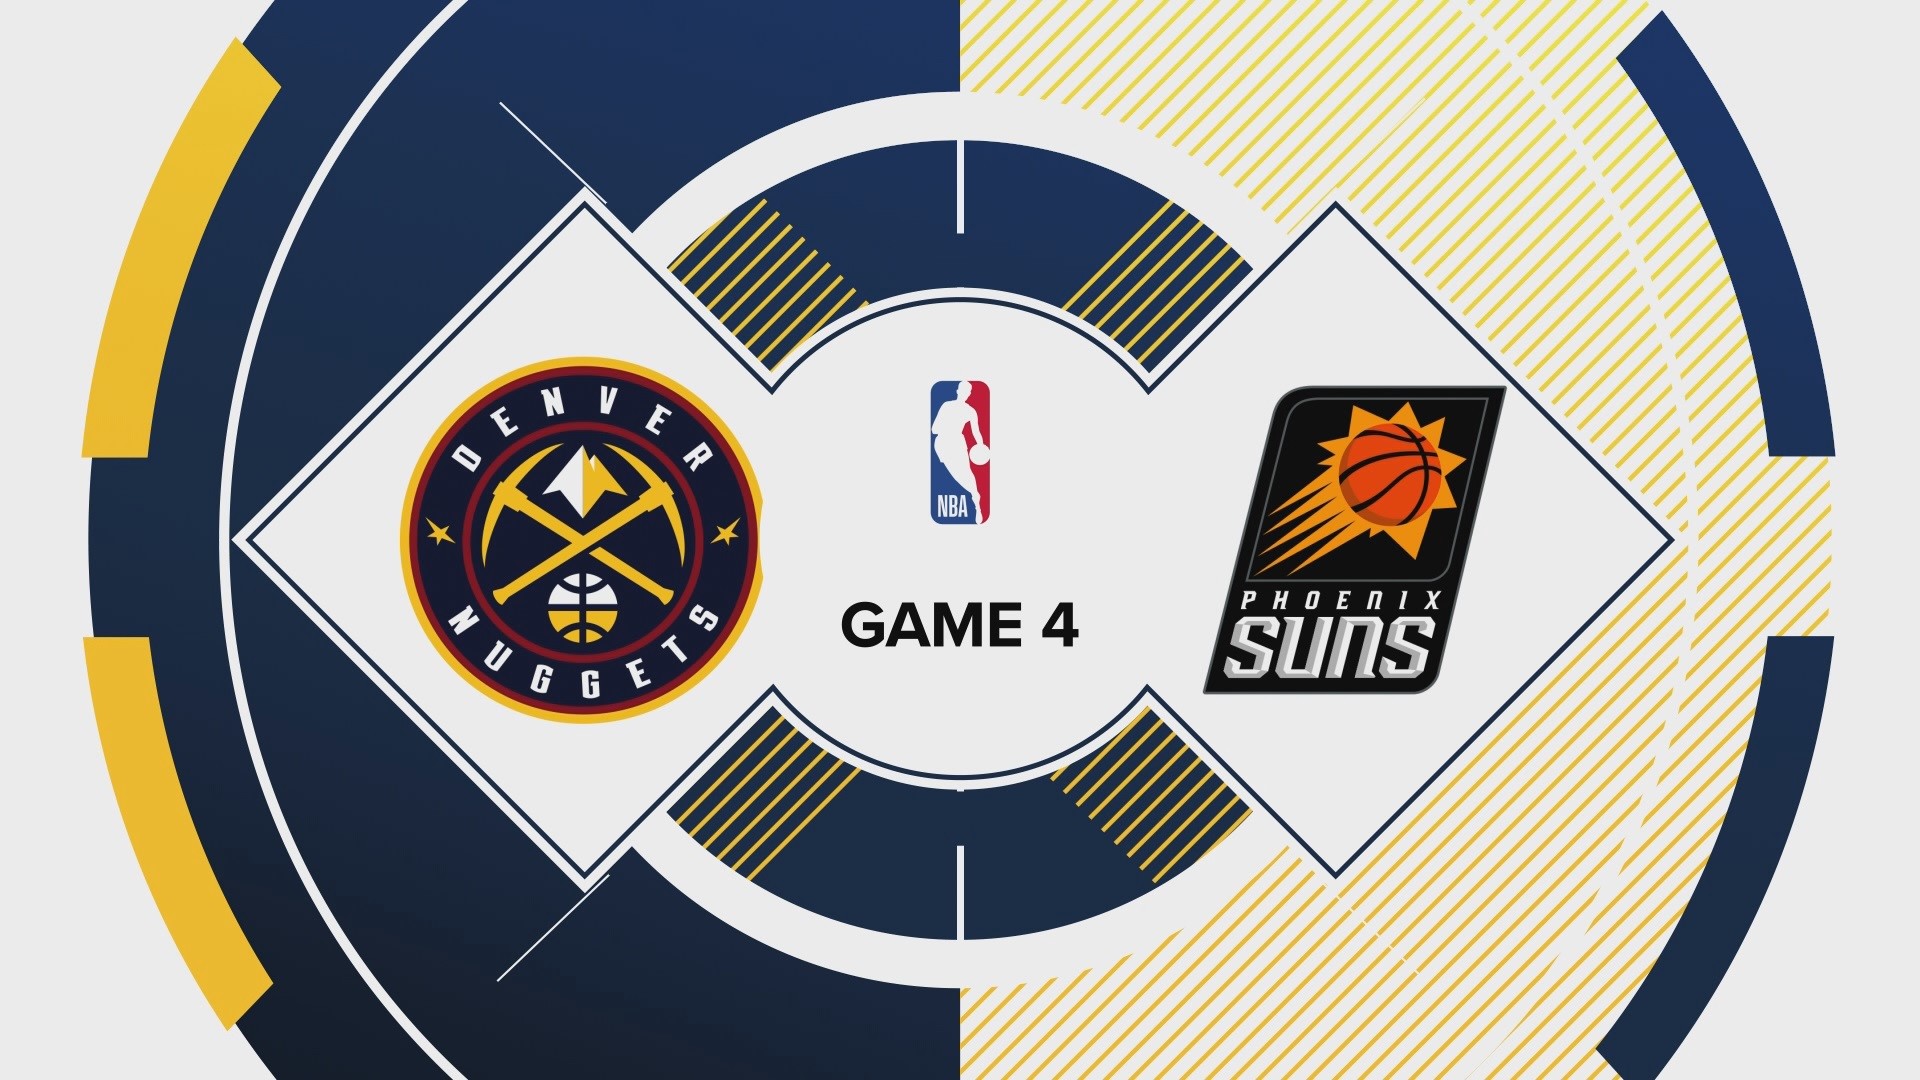 Denver and Phoenix tip off in the fourth game of the Western Conference semifinals on Sunday night.